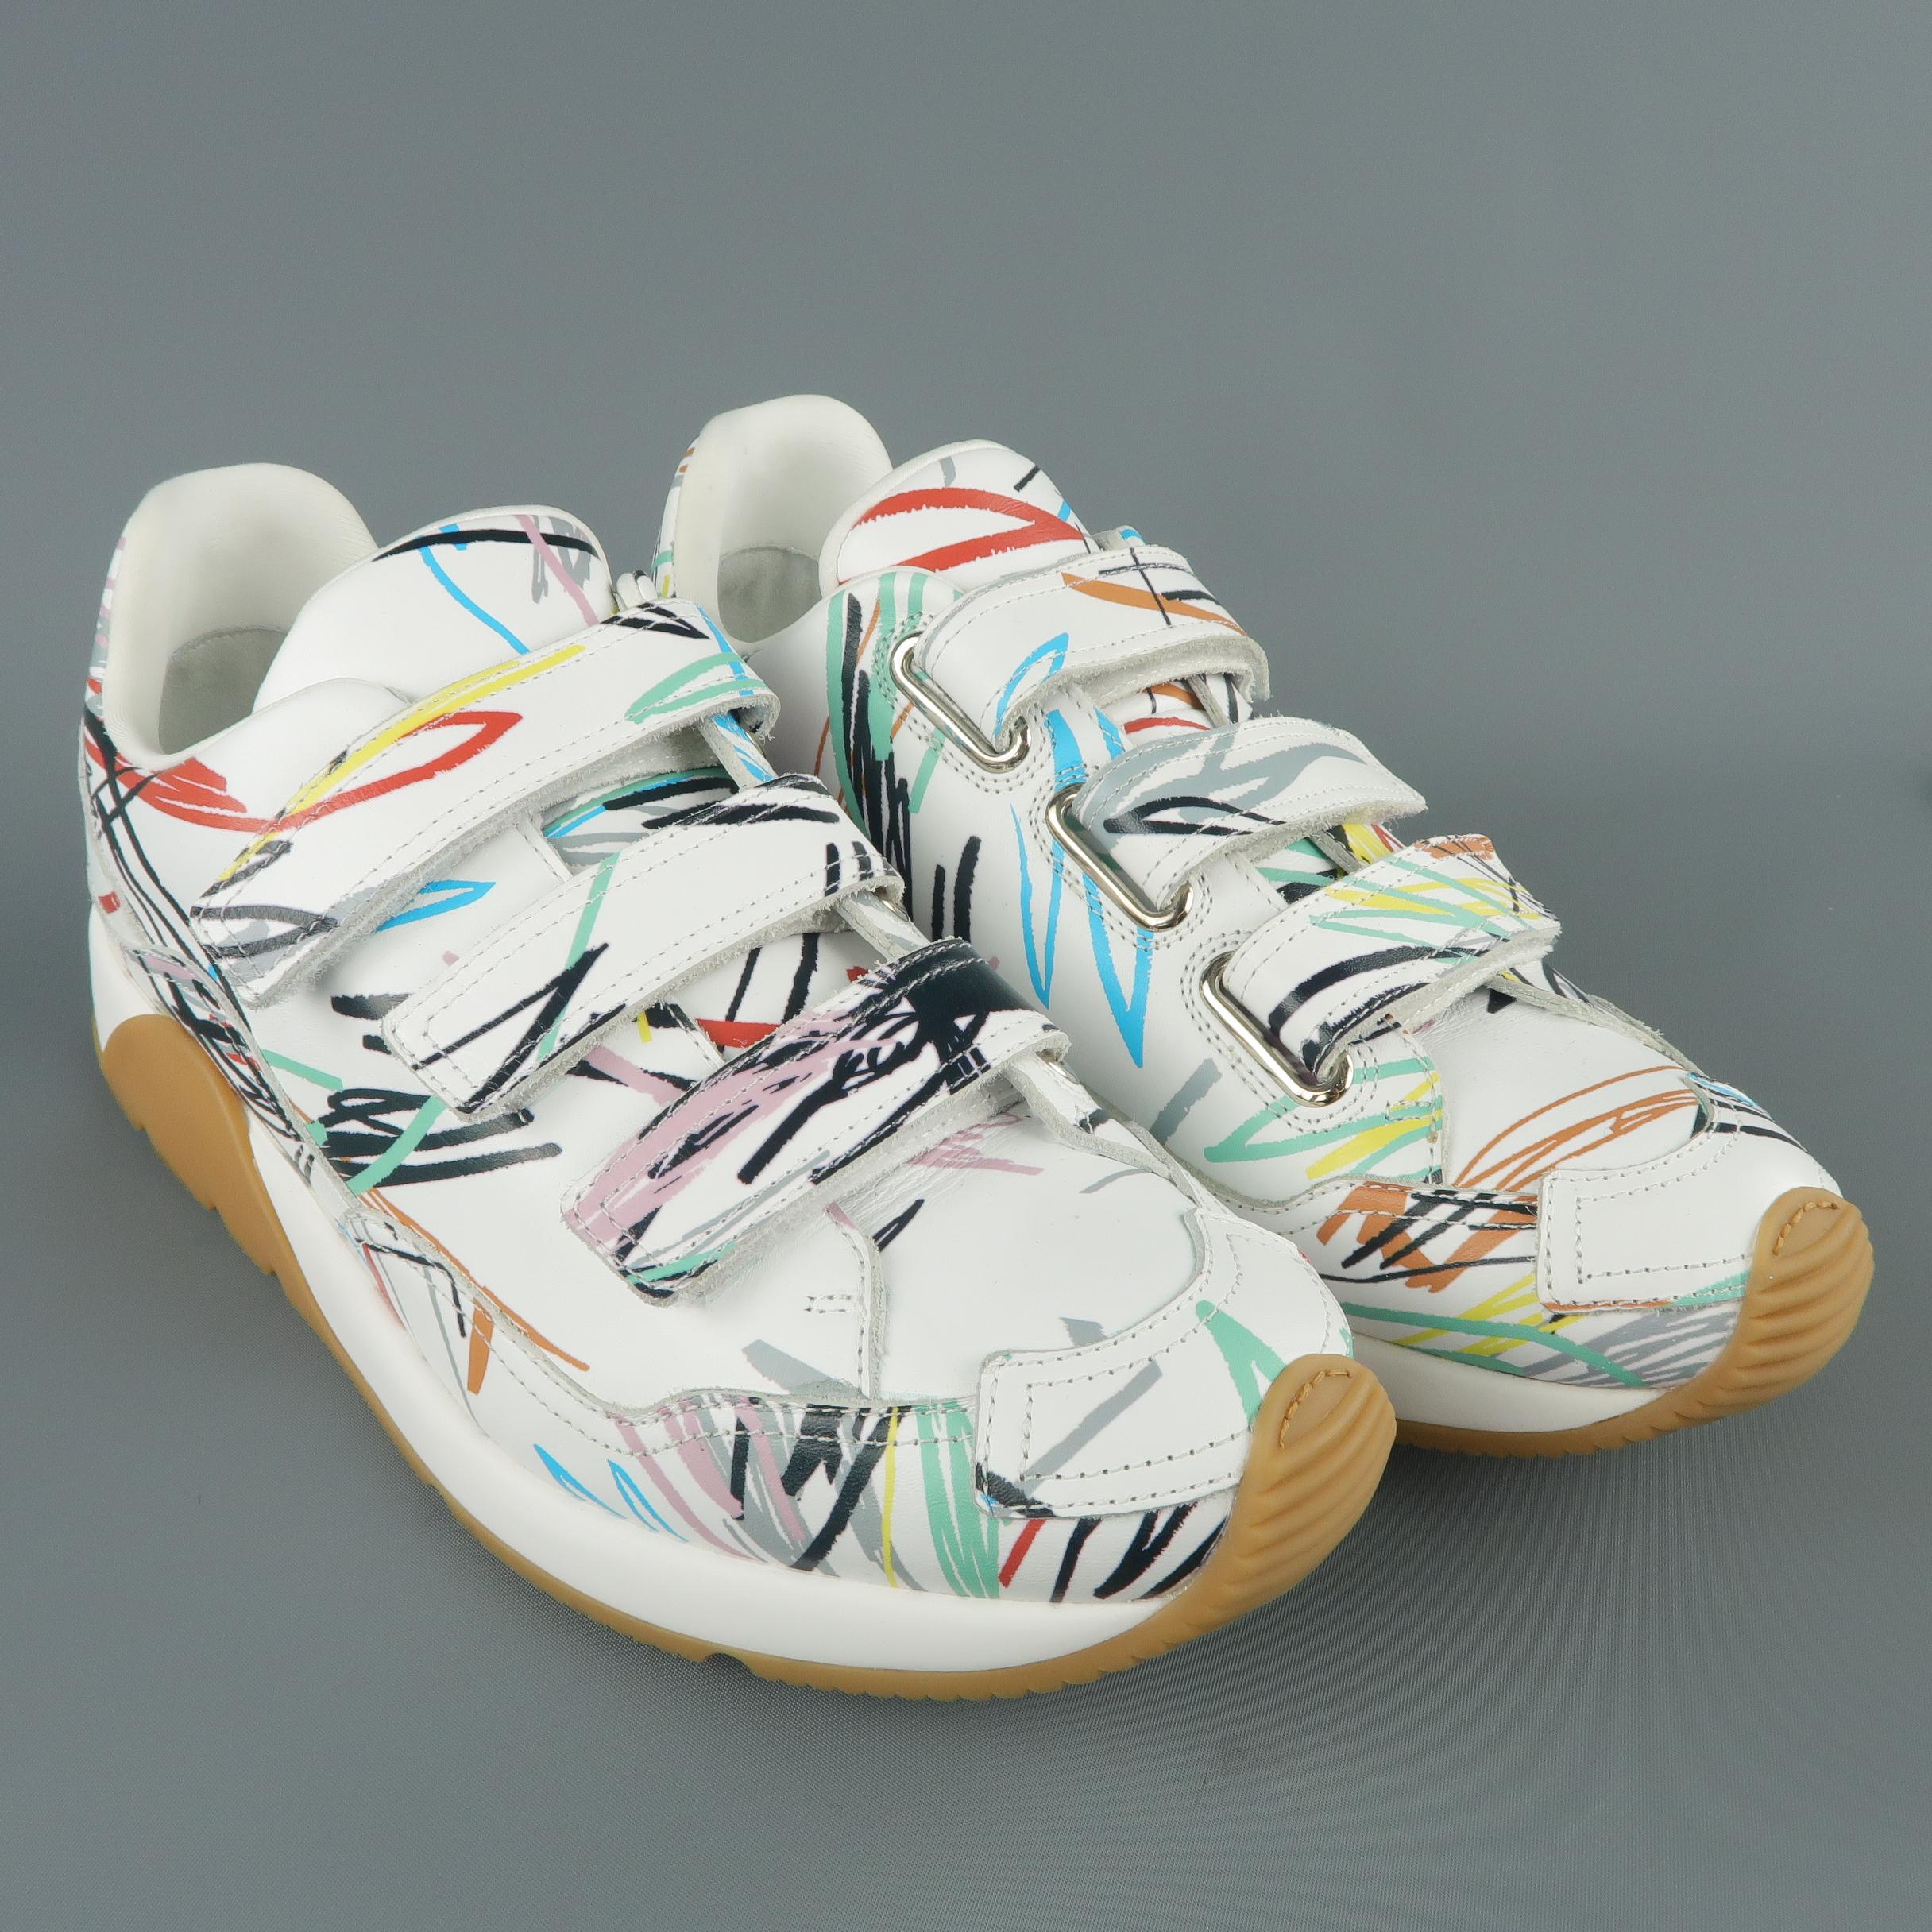 DIOR HOMME Spring-Summer 2015 runway sneakers come in white leather with multi-color scribble print throughout, triple velcro closure, thick rubber sole, and CD logo back.
 
Marked: IT 43
 
Outsole: 12.25 x 445 in.